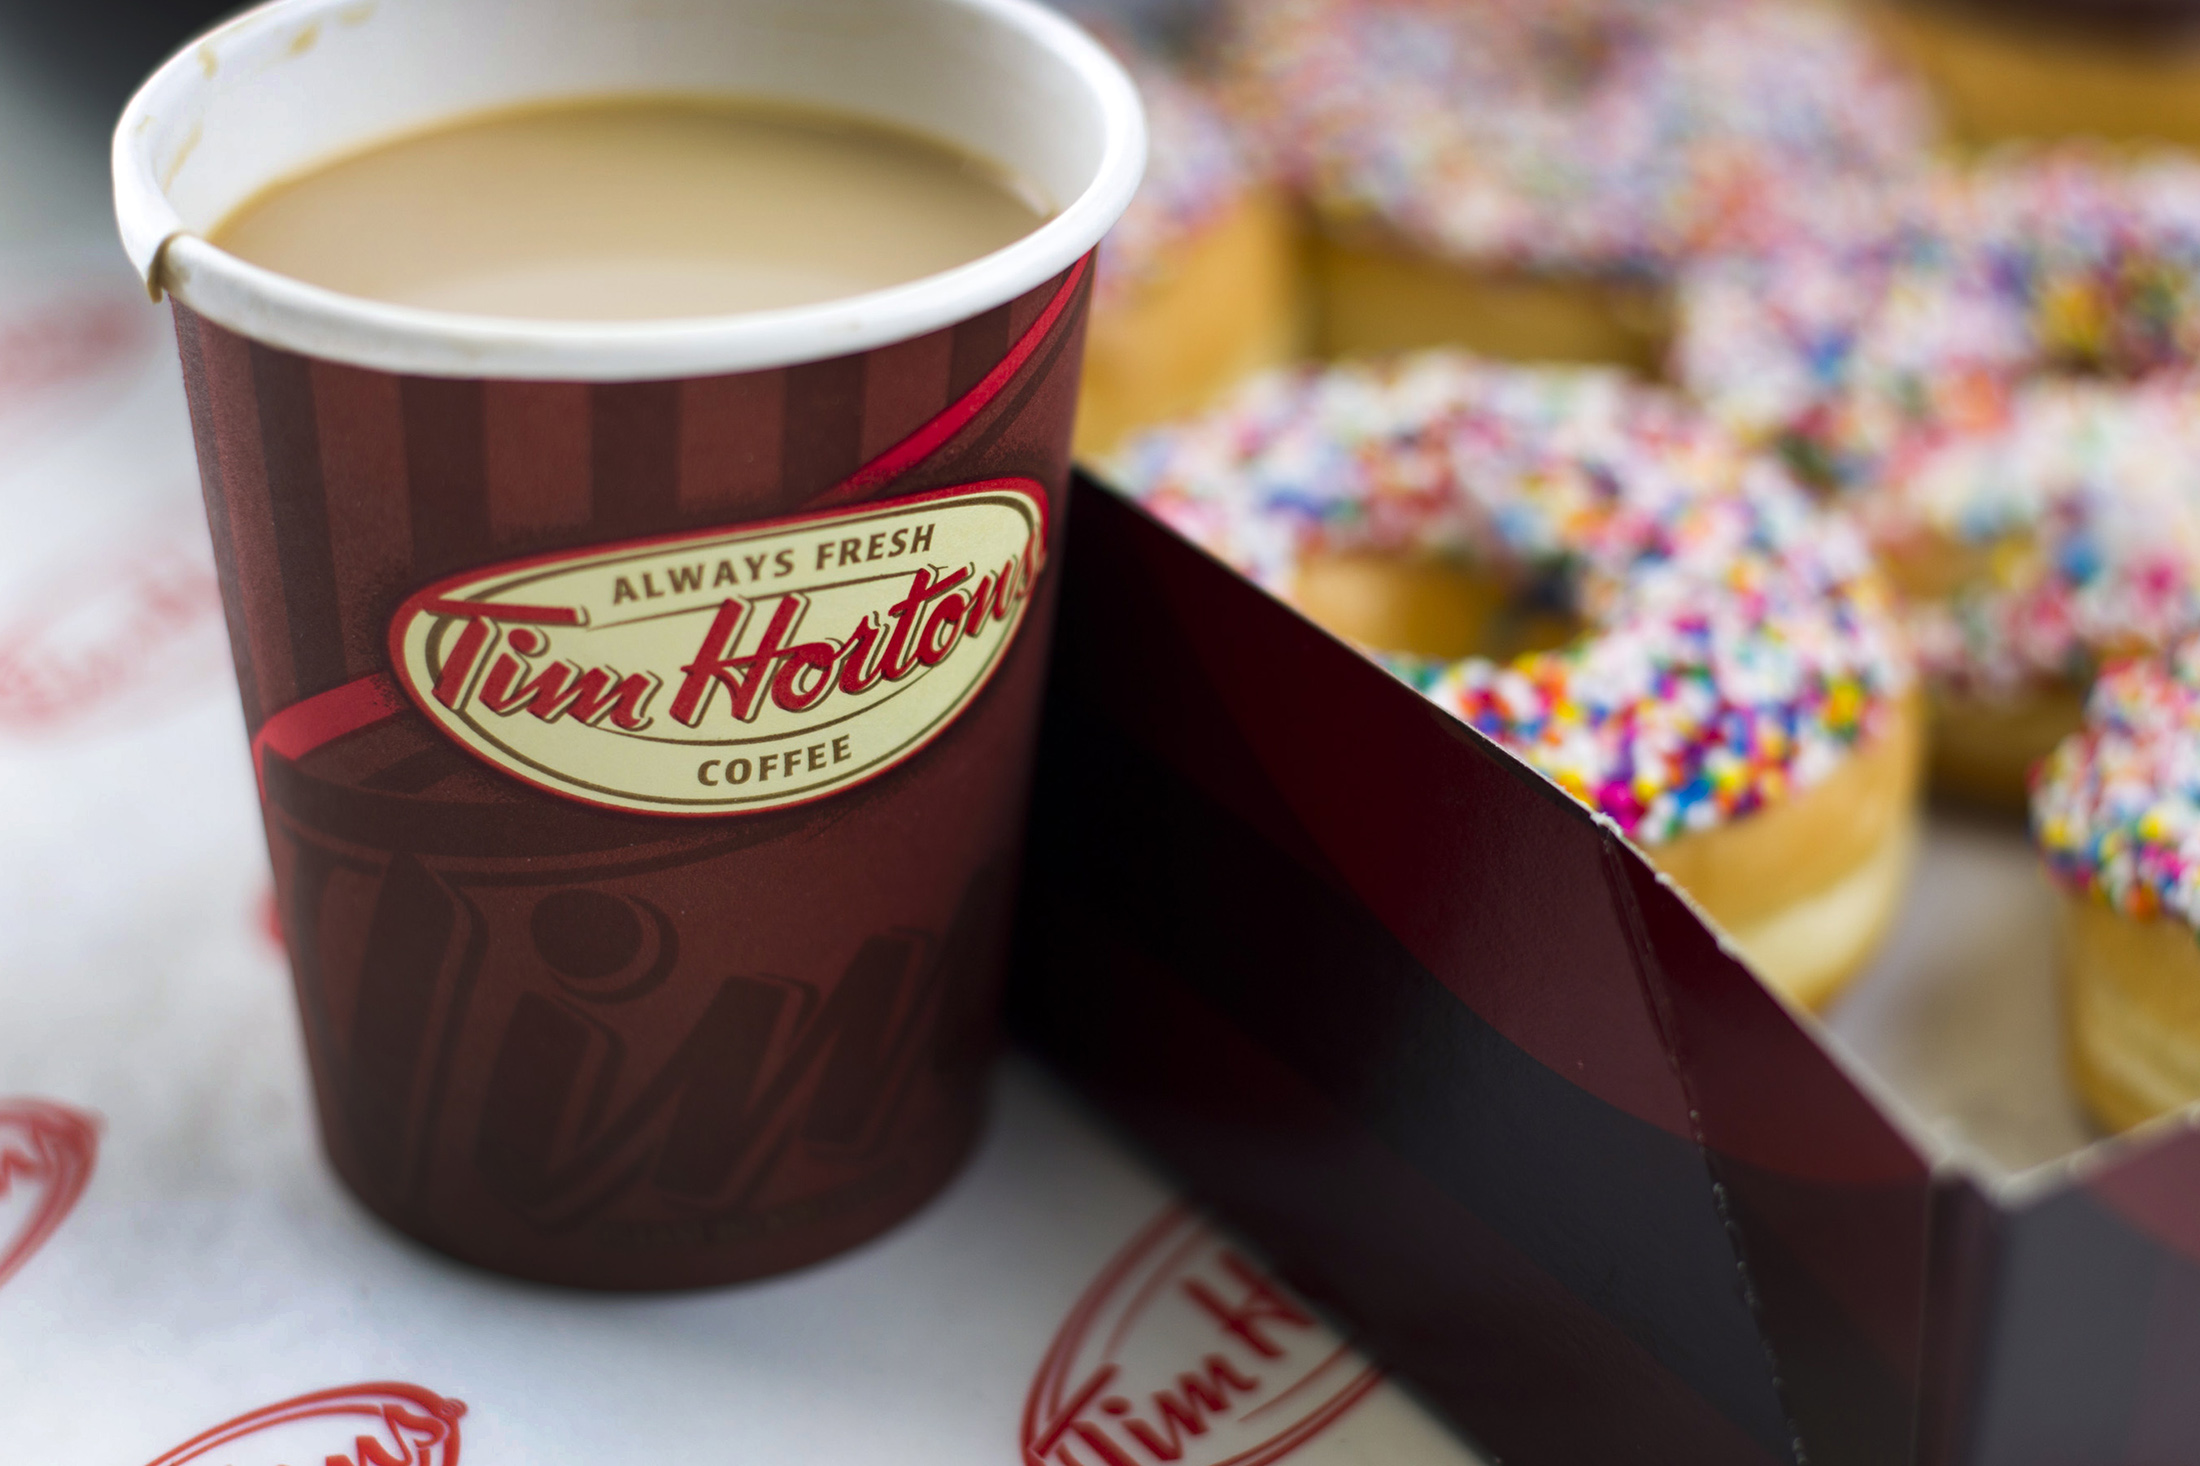 Can Tim Hortons' Brazilian president return the iconic Canadian